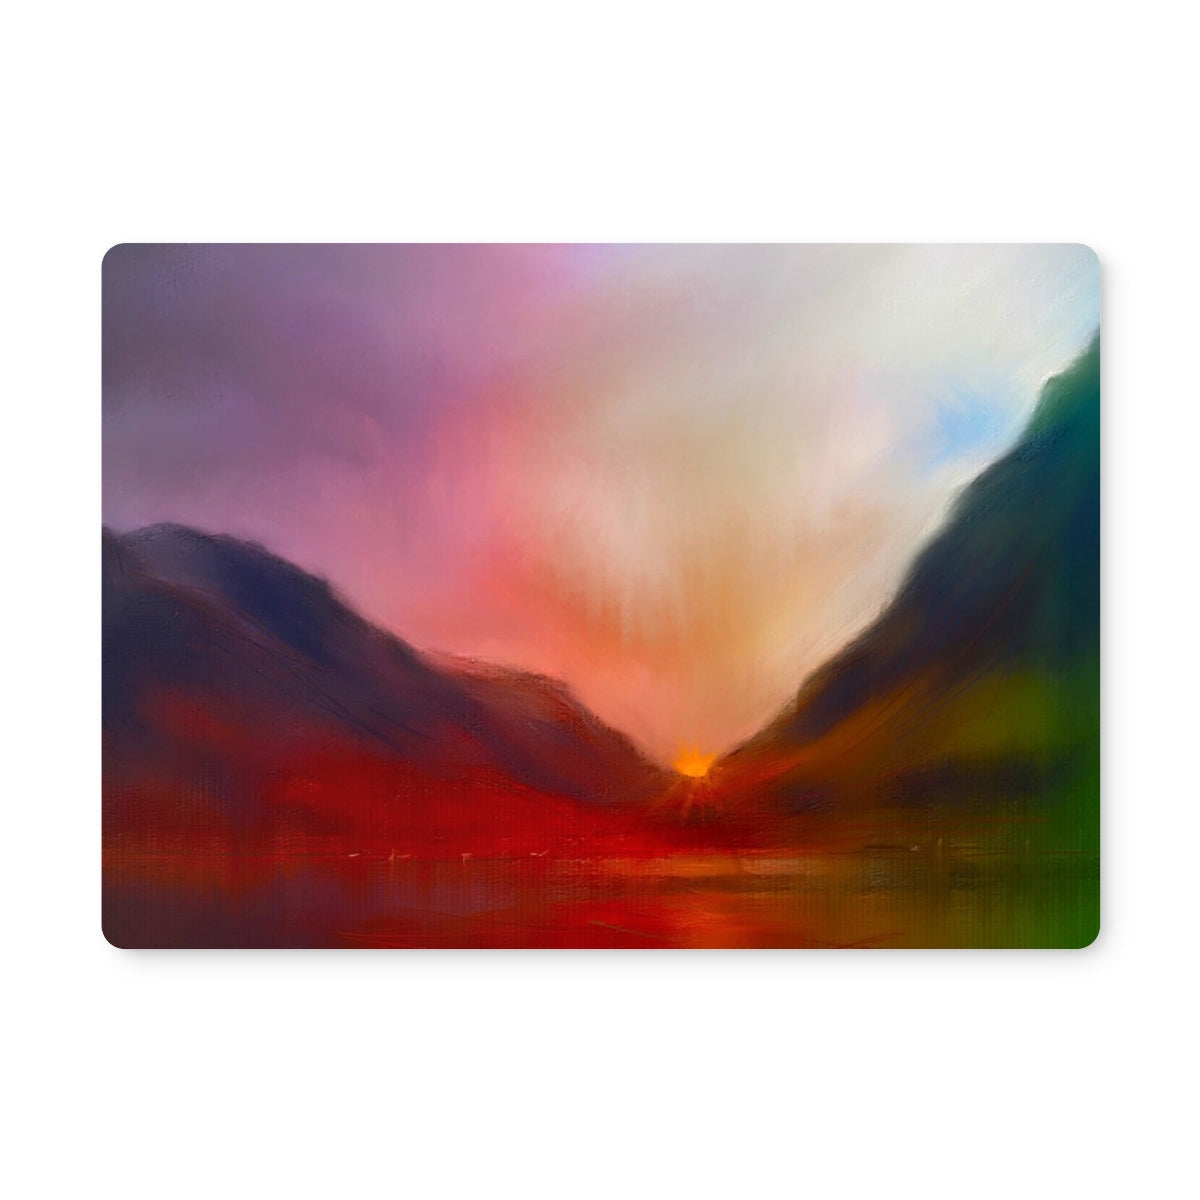 Glencoe Sunset Art Gifts Placemat-Placemats-Glencoe Art Gallery-2 Placemats-Paintings, Prints, Homeware, Art Gifts From Scotland By Scottish Artist Kevin Hunter